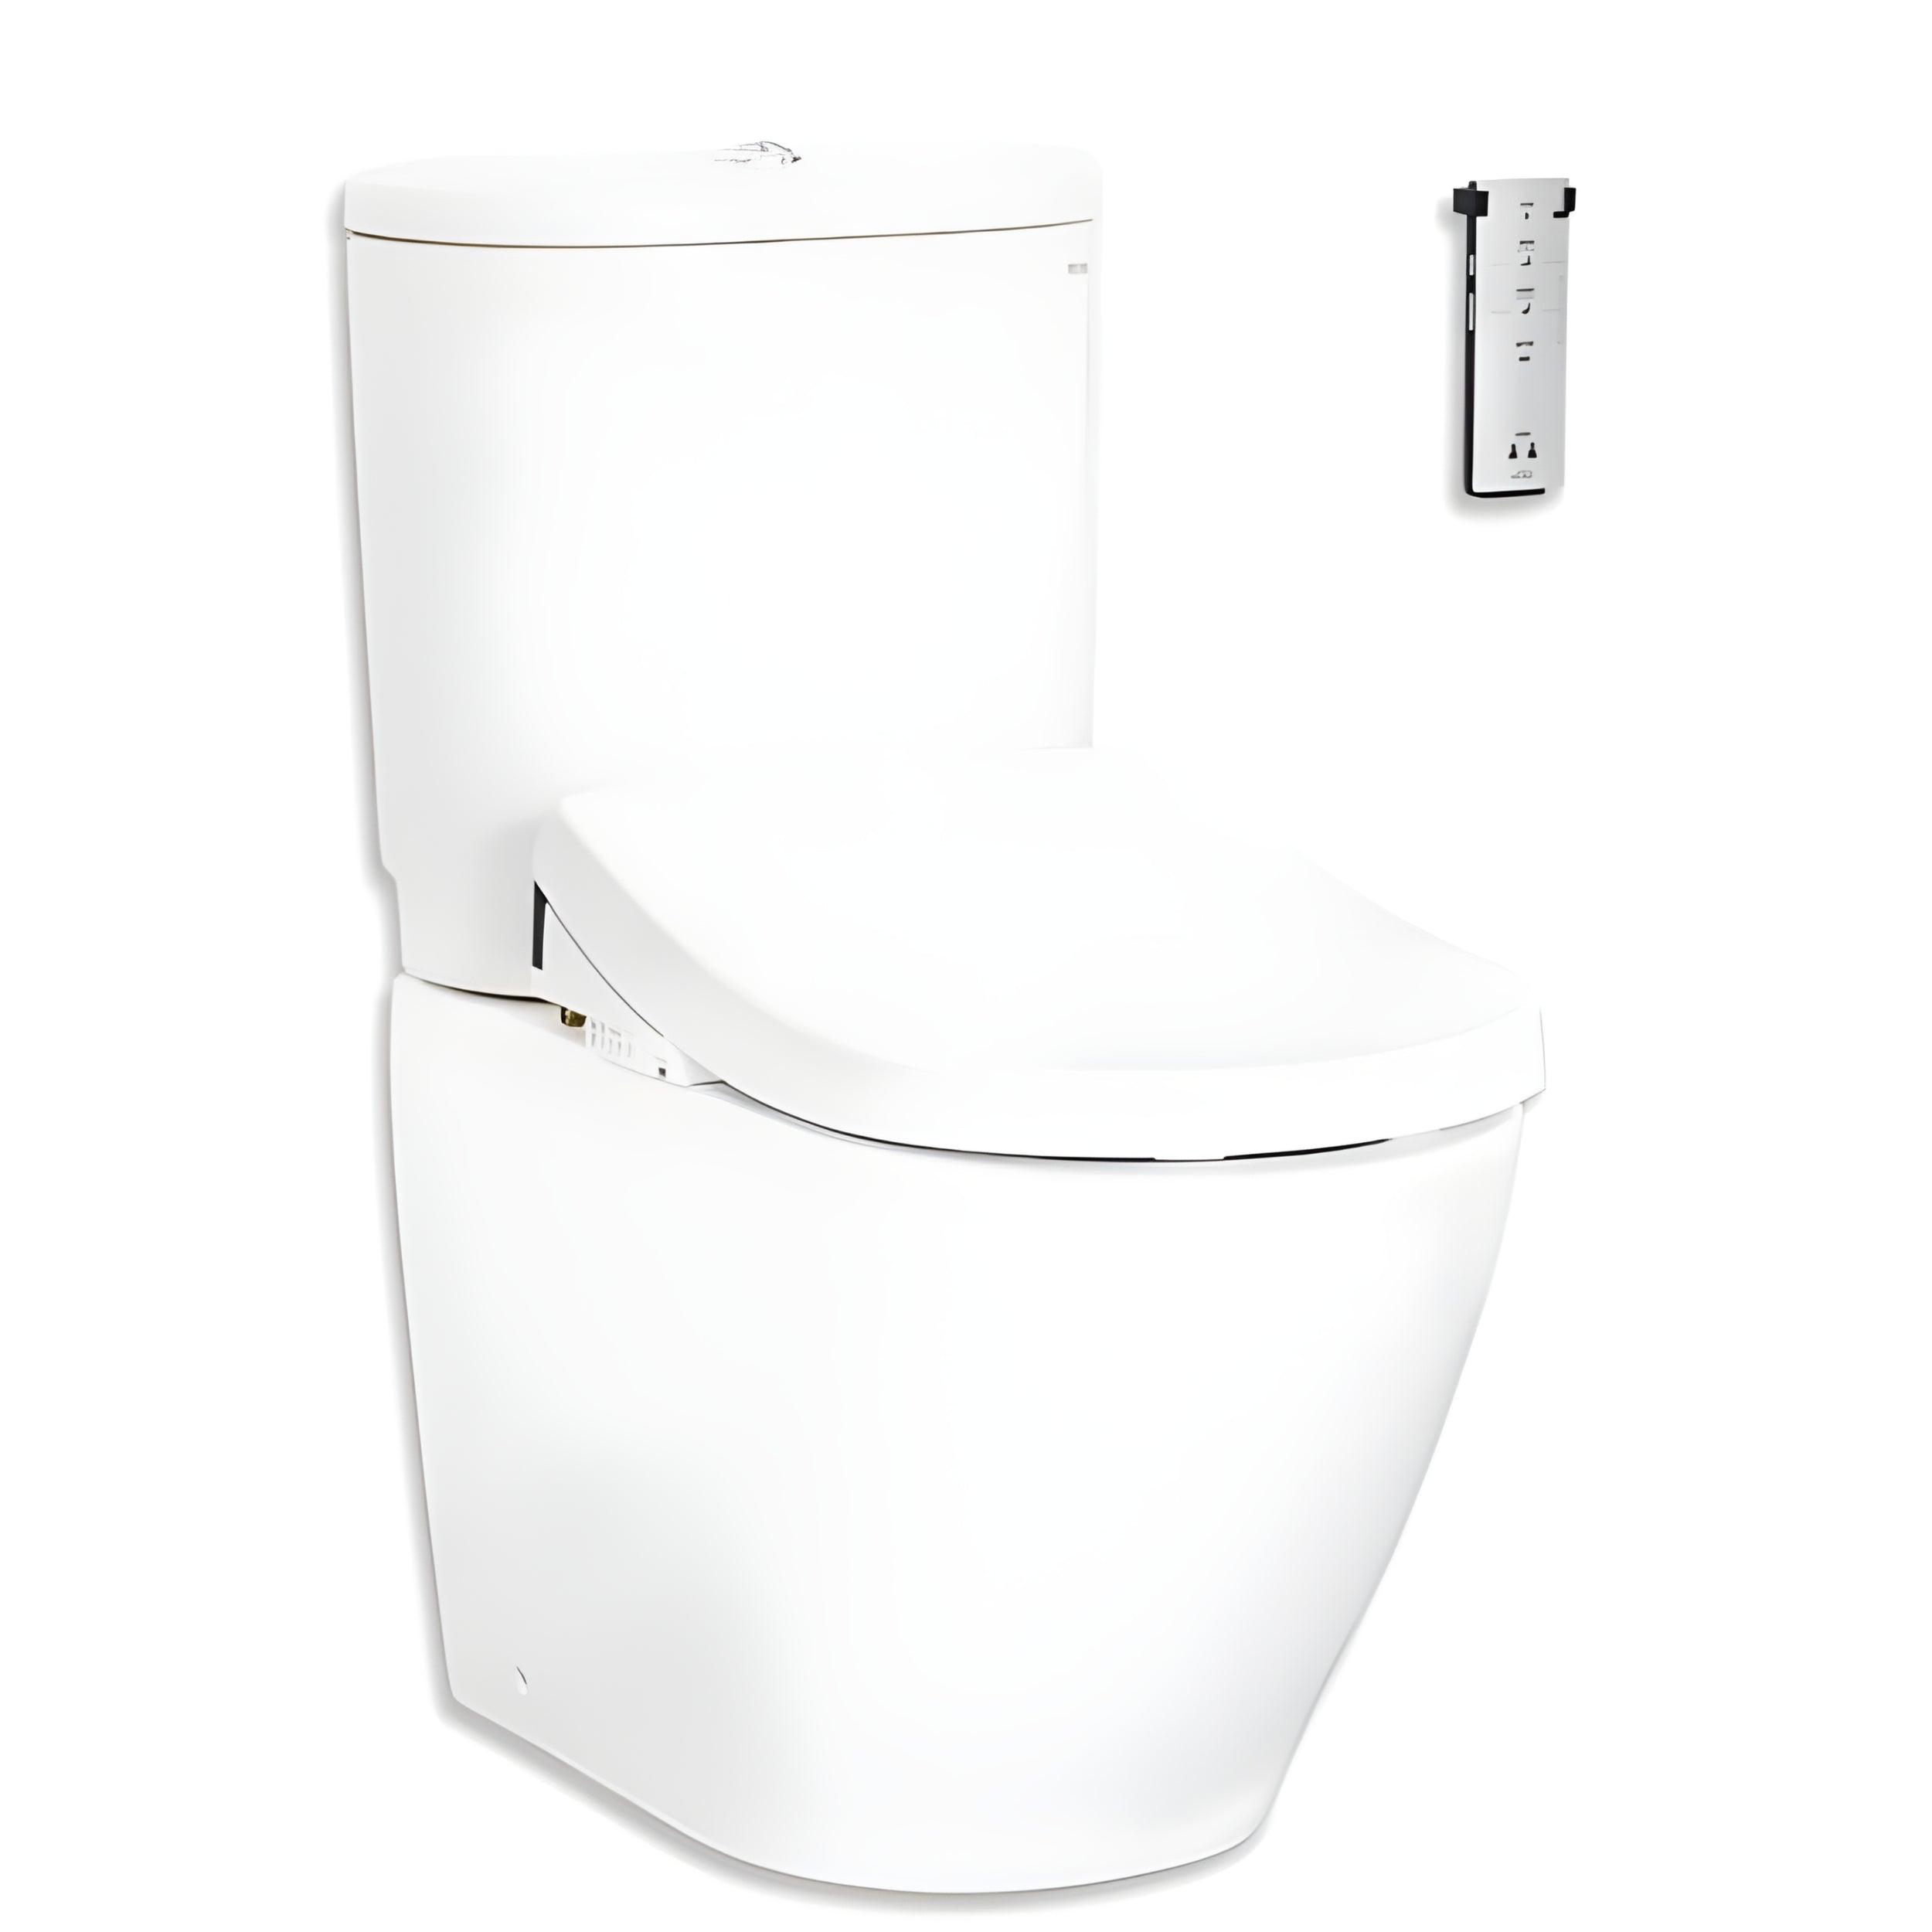 TOTO BASIC+ BTW TOILET AND WASHLET W/ REMOTE CONTROL AND AUTOLID PACKAGE D SHAPE GLOSS WHITE